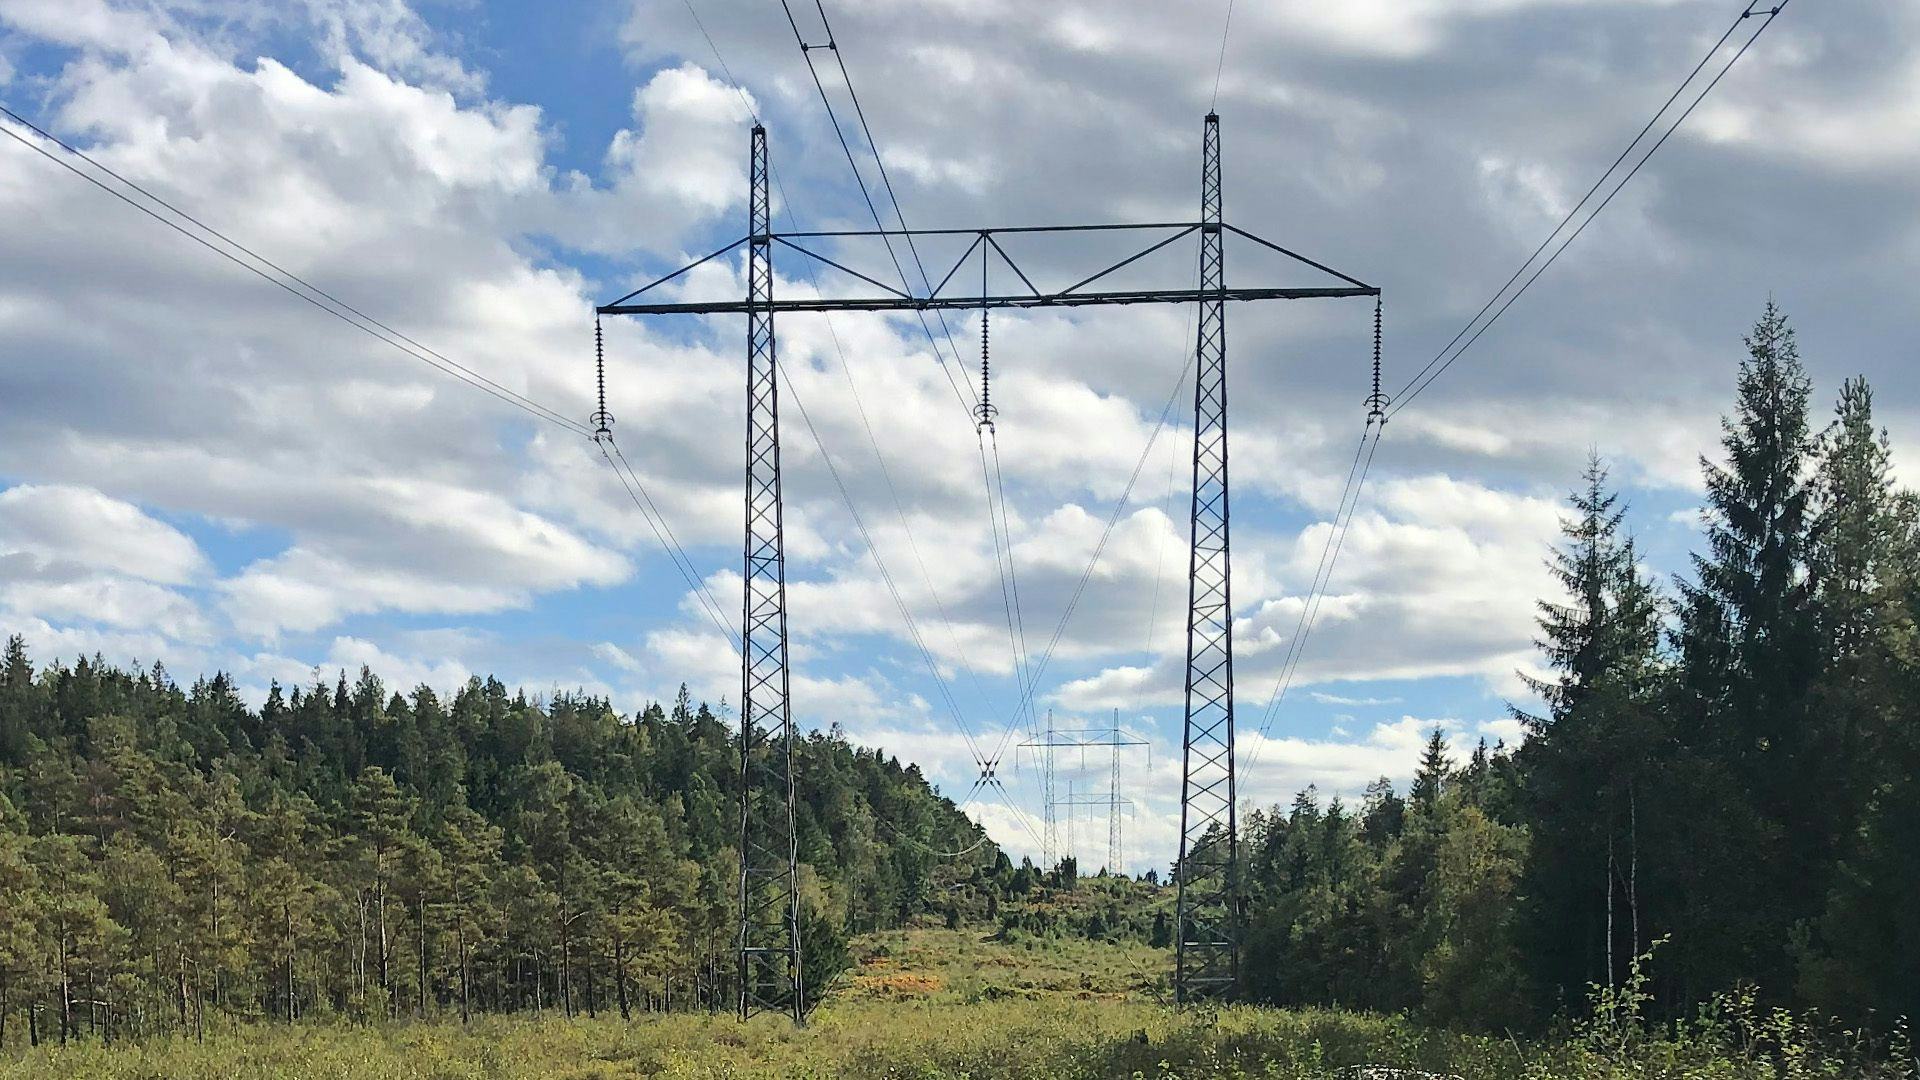 A huge power transmission surrounded by trees under a partly cloudy sky